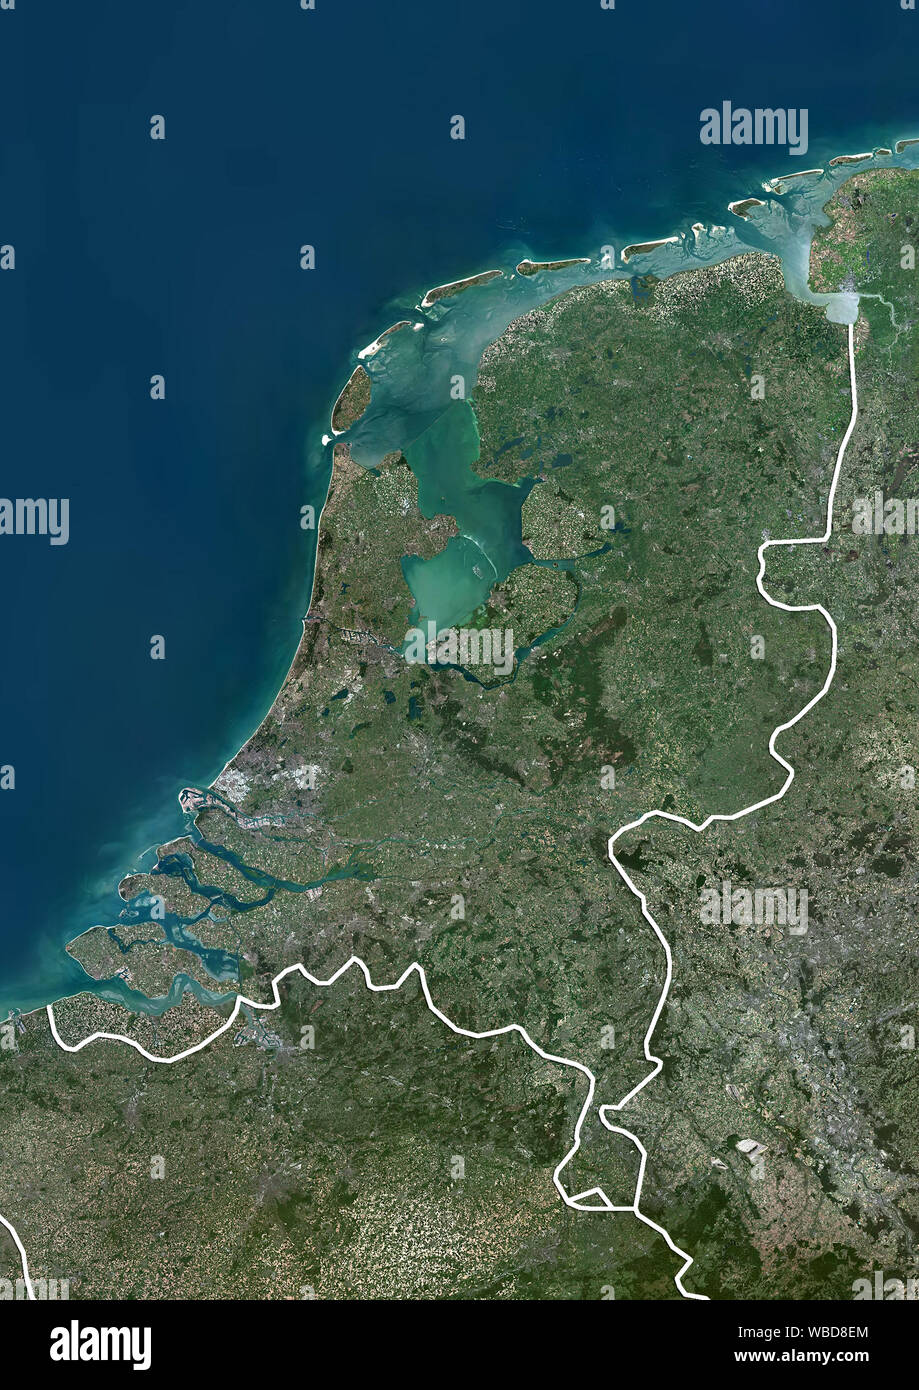 Color satellite image of the Netherlands (with administrative boundaries). This image was compiled from data acquired by Sentinel-2 & Landsat 8 satellites. Stock Photo